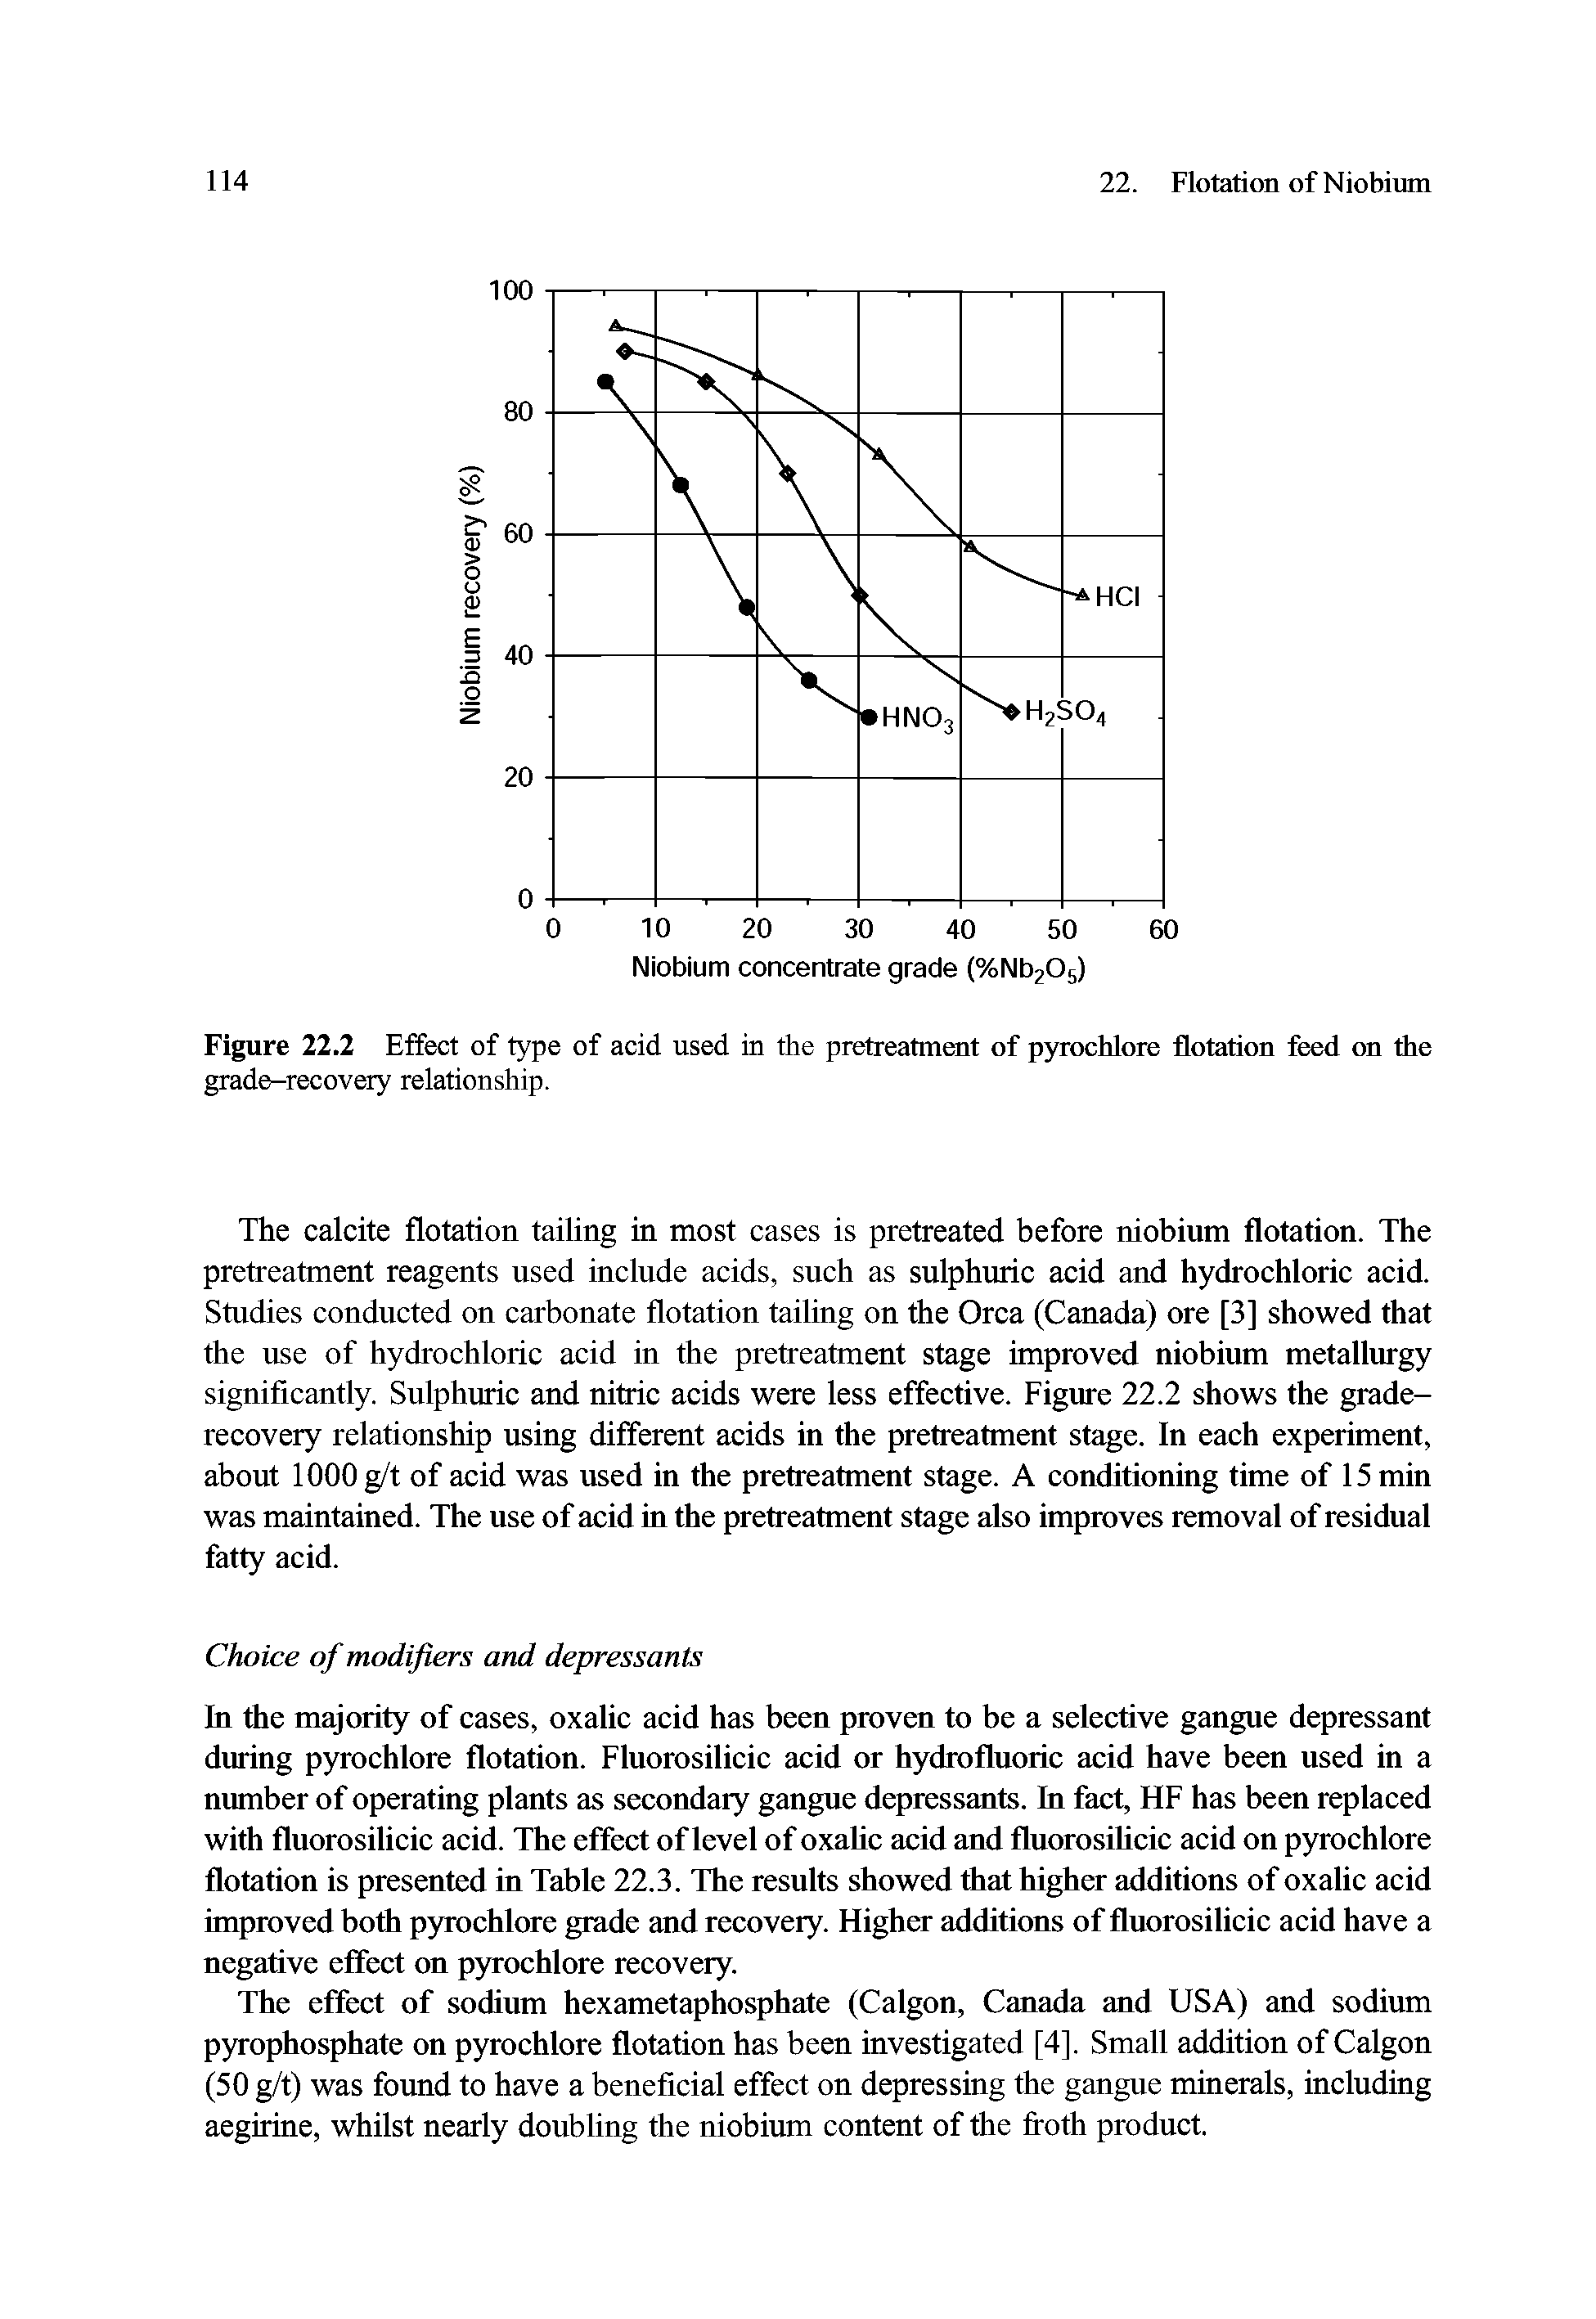 Figure 22.2 Effect of type of acid used in the pretreatment of pyrochlore flotation feed on the grade-recovery relationship.